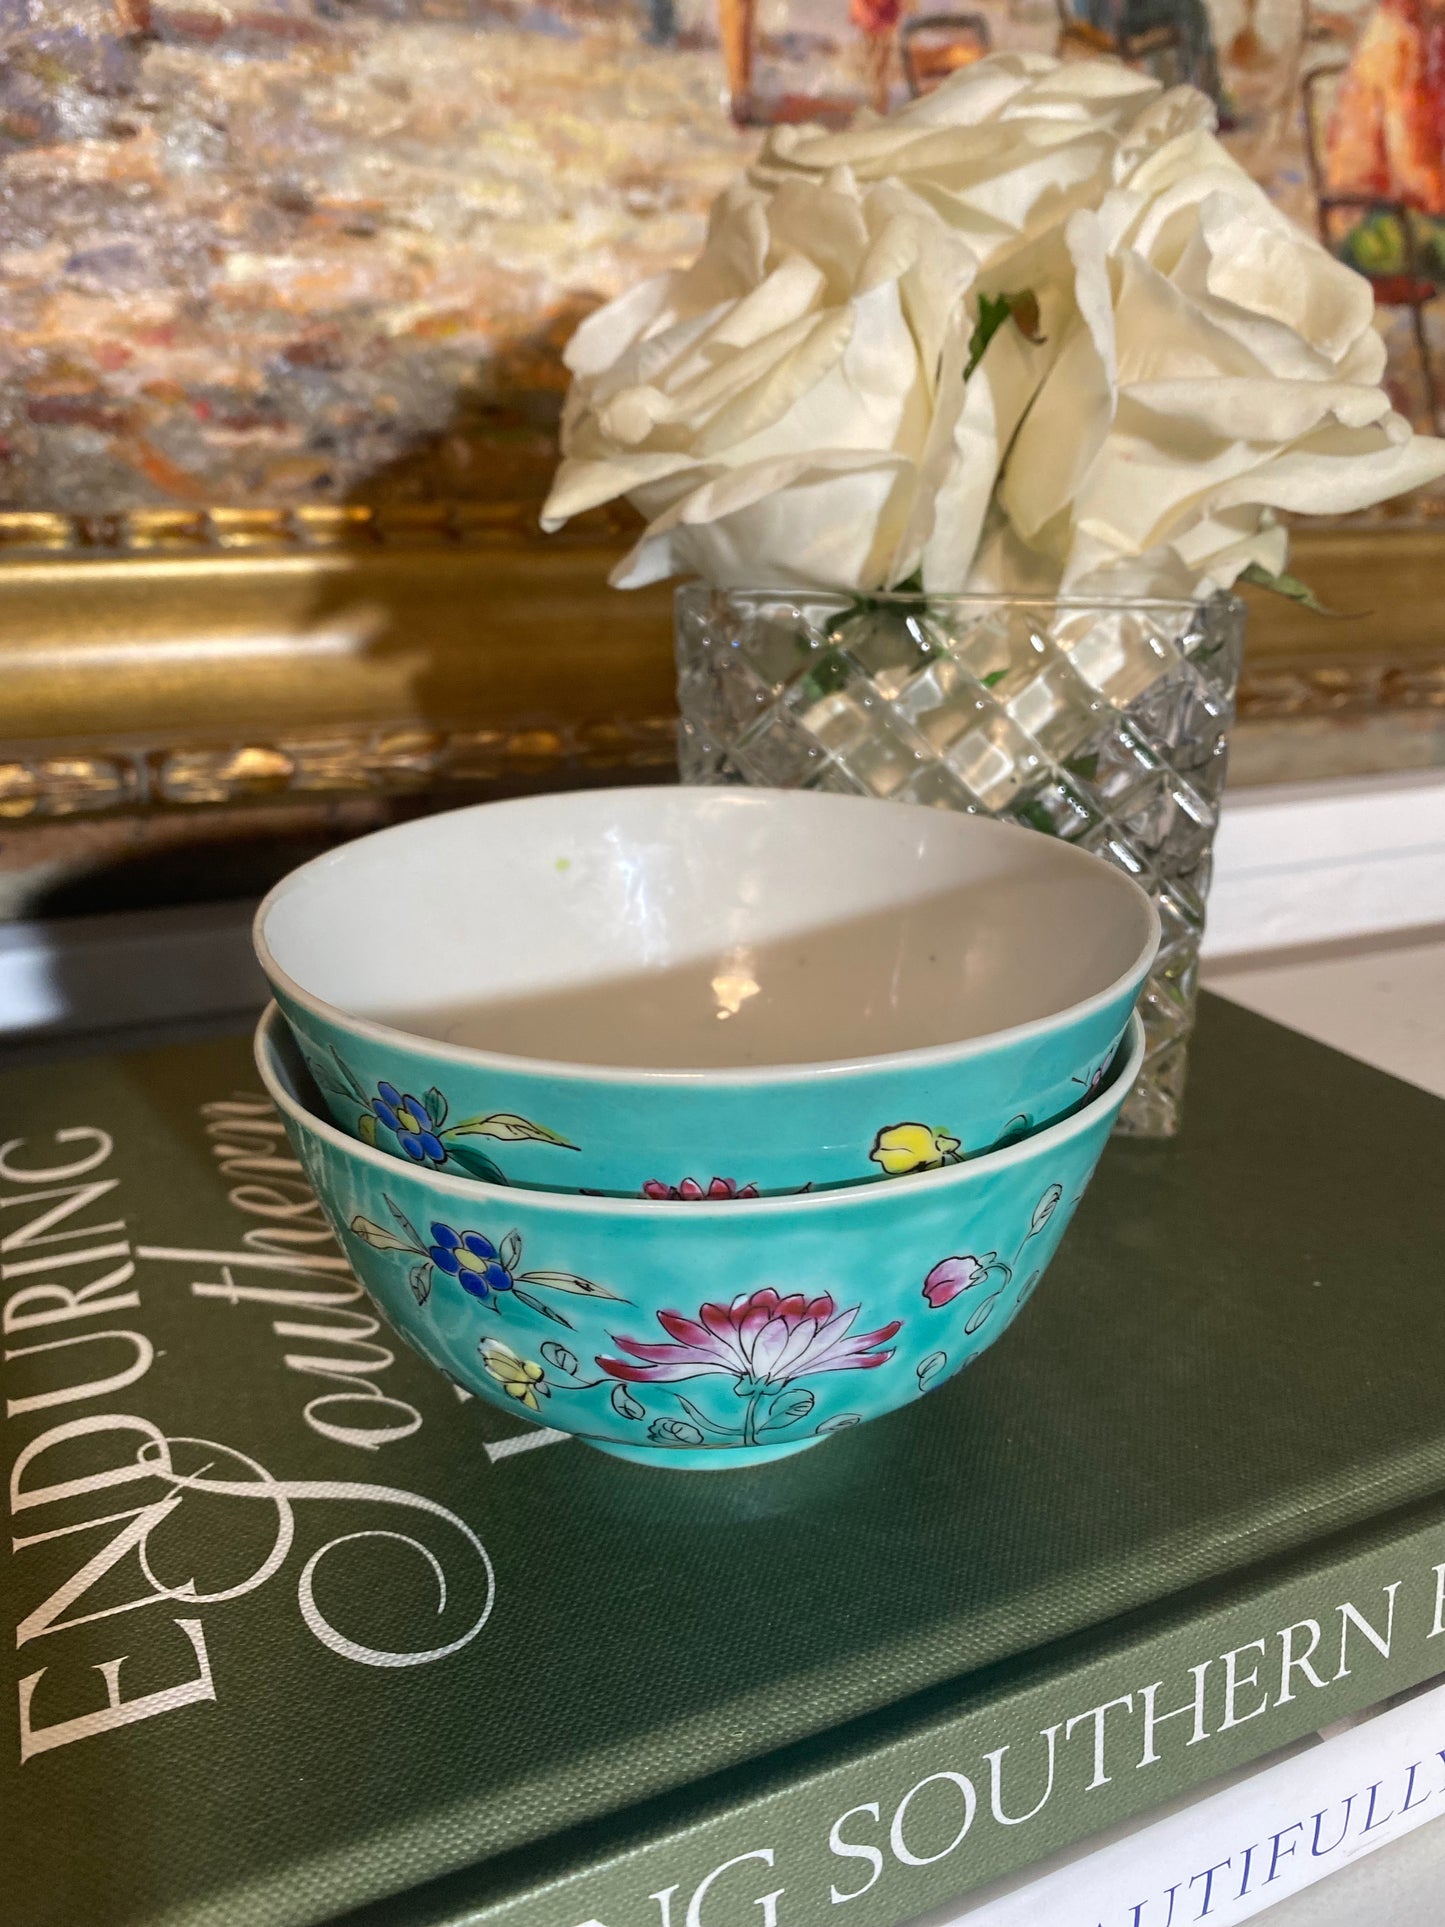 Chinese Antique Porcelain Floral Bowl with Turquoise Enamel - Qianlong or Early Republic Era